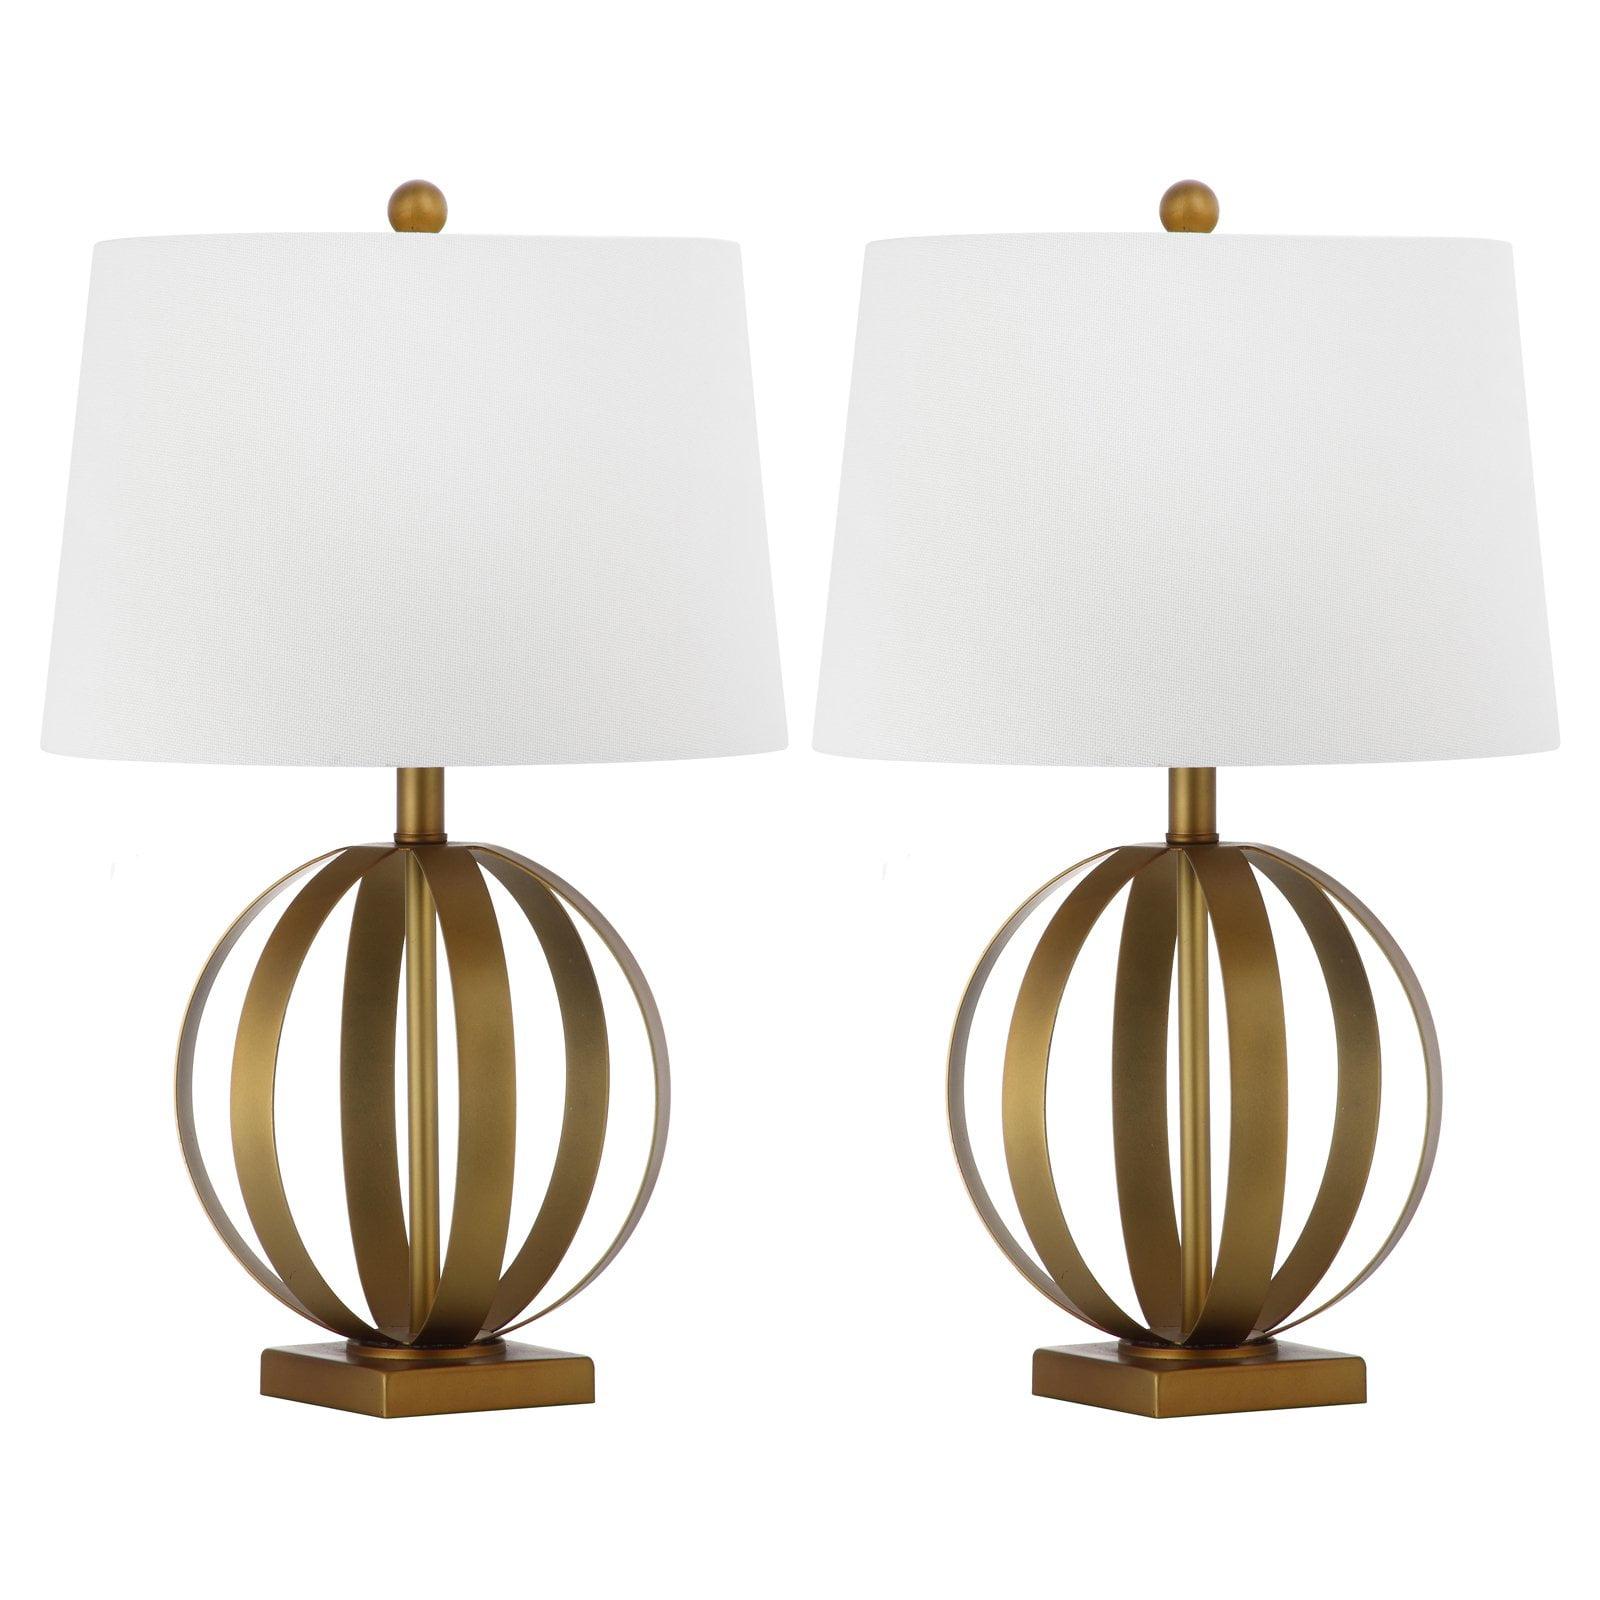 Euginia Sphere Gold-Finished Metal Table Lamp Set with White Cotton Shade